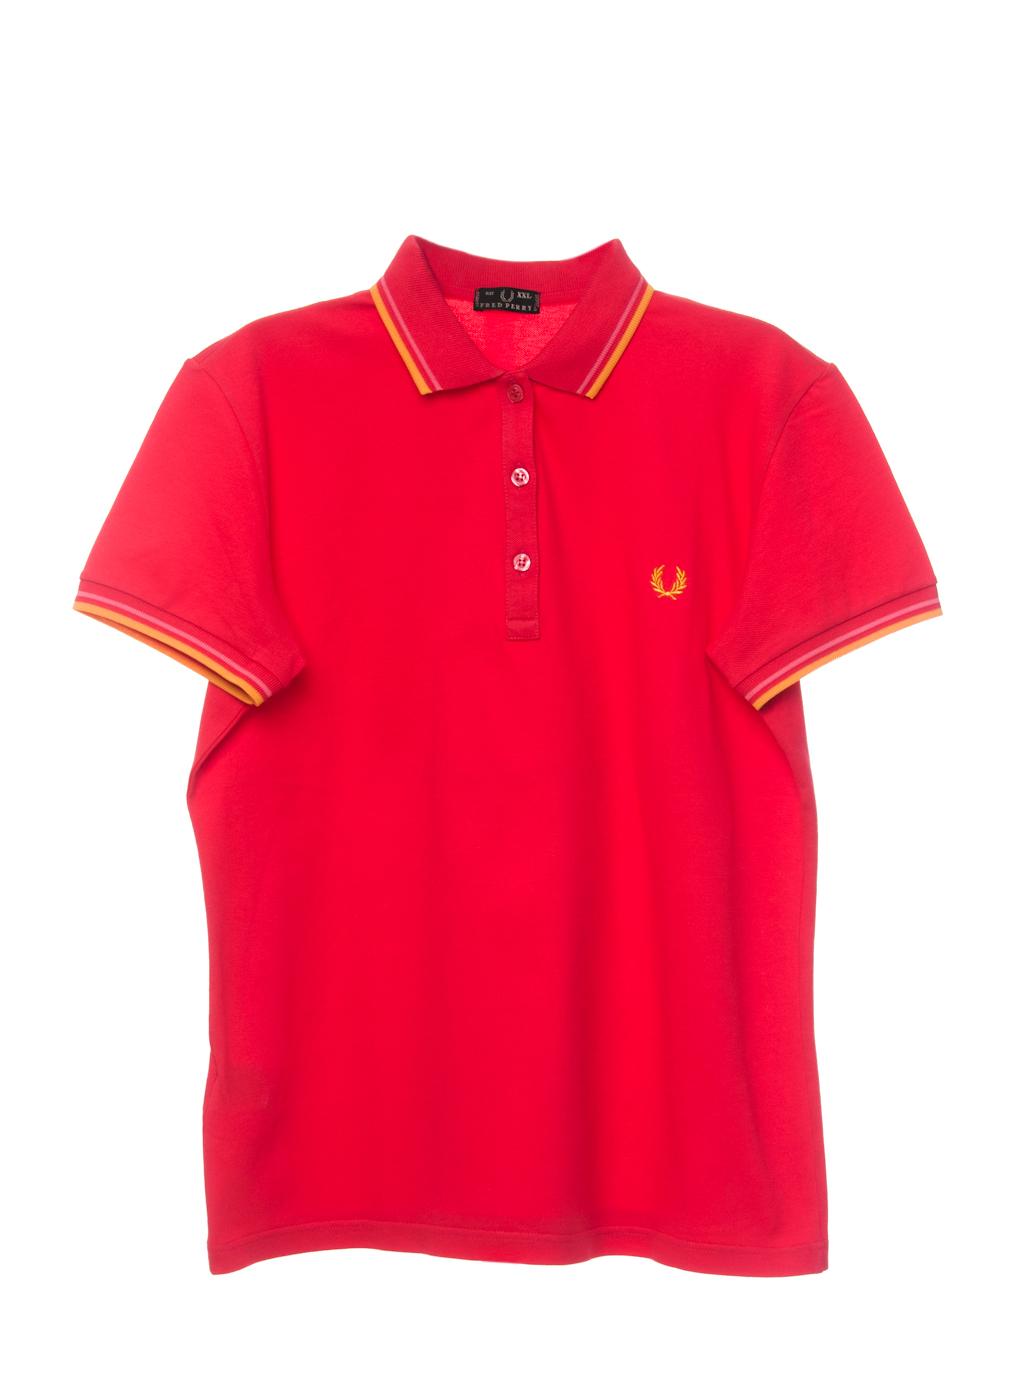 Foto Polo Fred Perry Spanish foto 289455